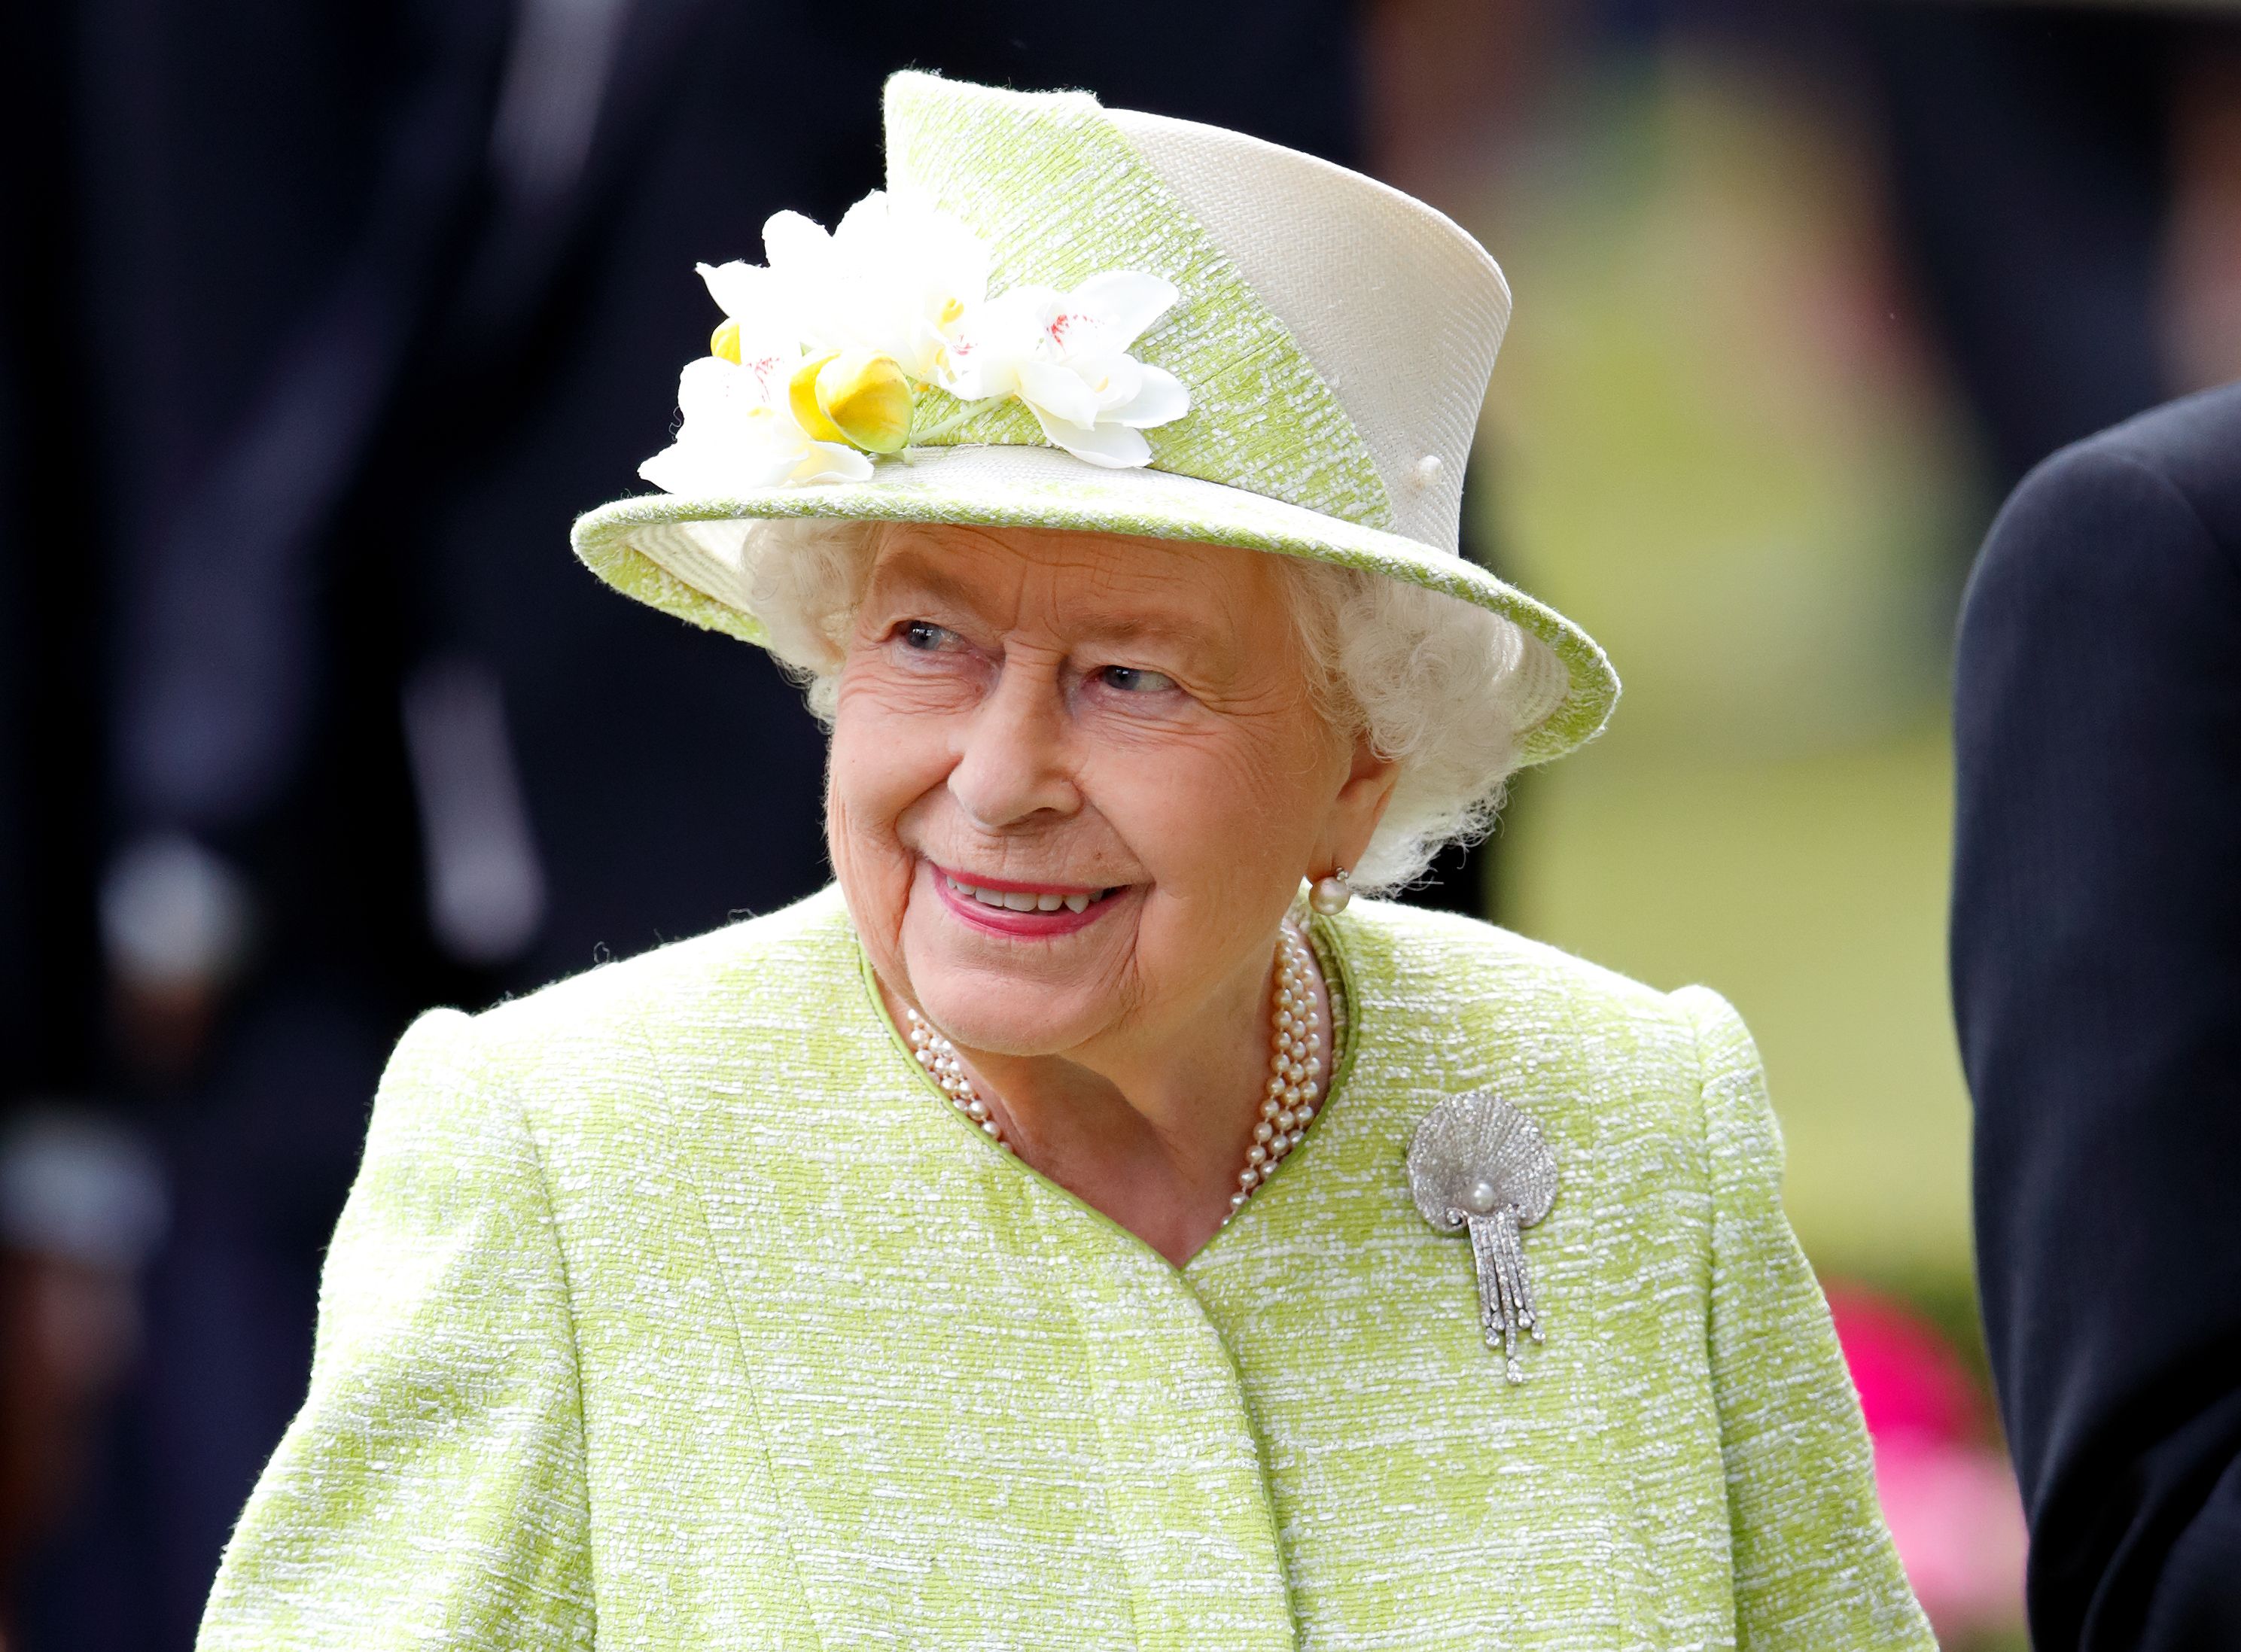 Queen Elizabeth II at day five of Royal Ascot at Ascot Racecourse on June 22, 2019 | Photo: Getty Images